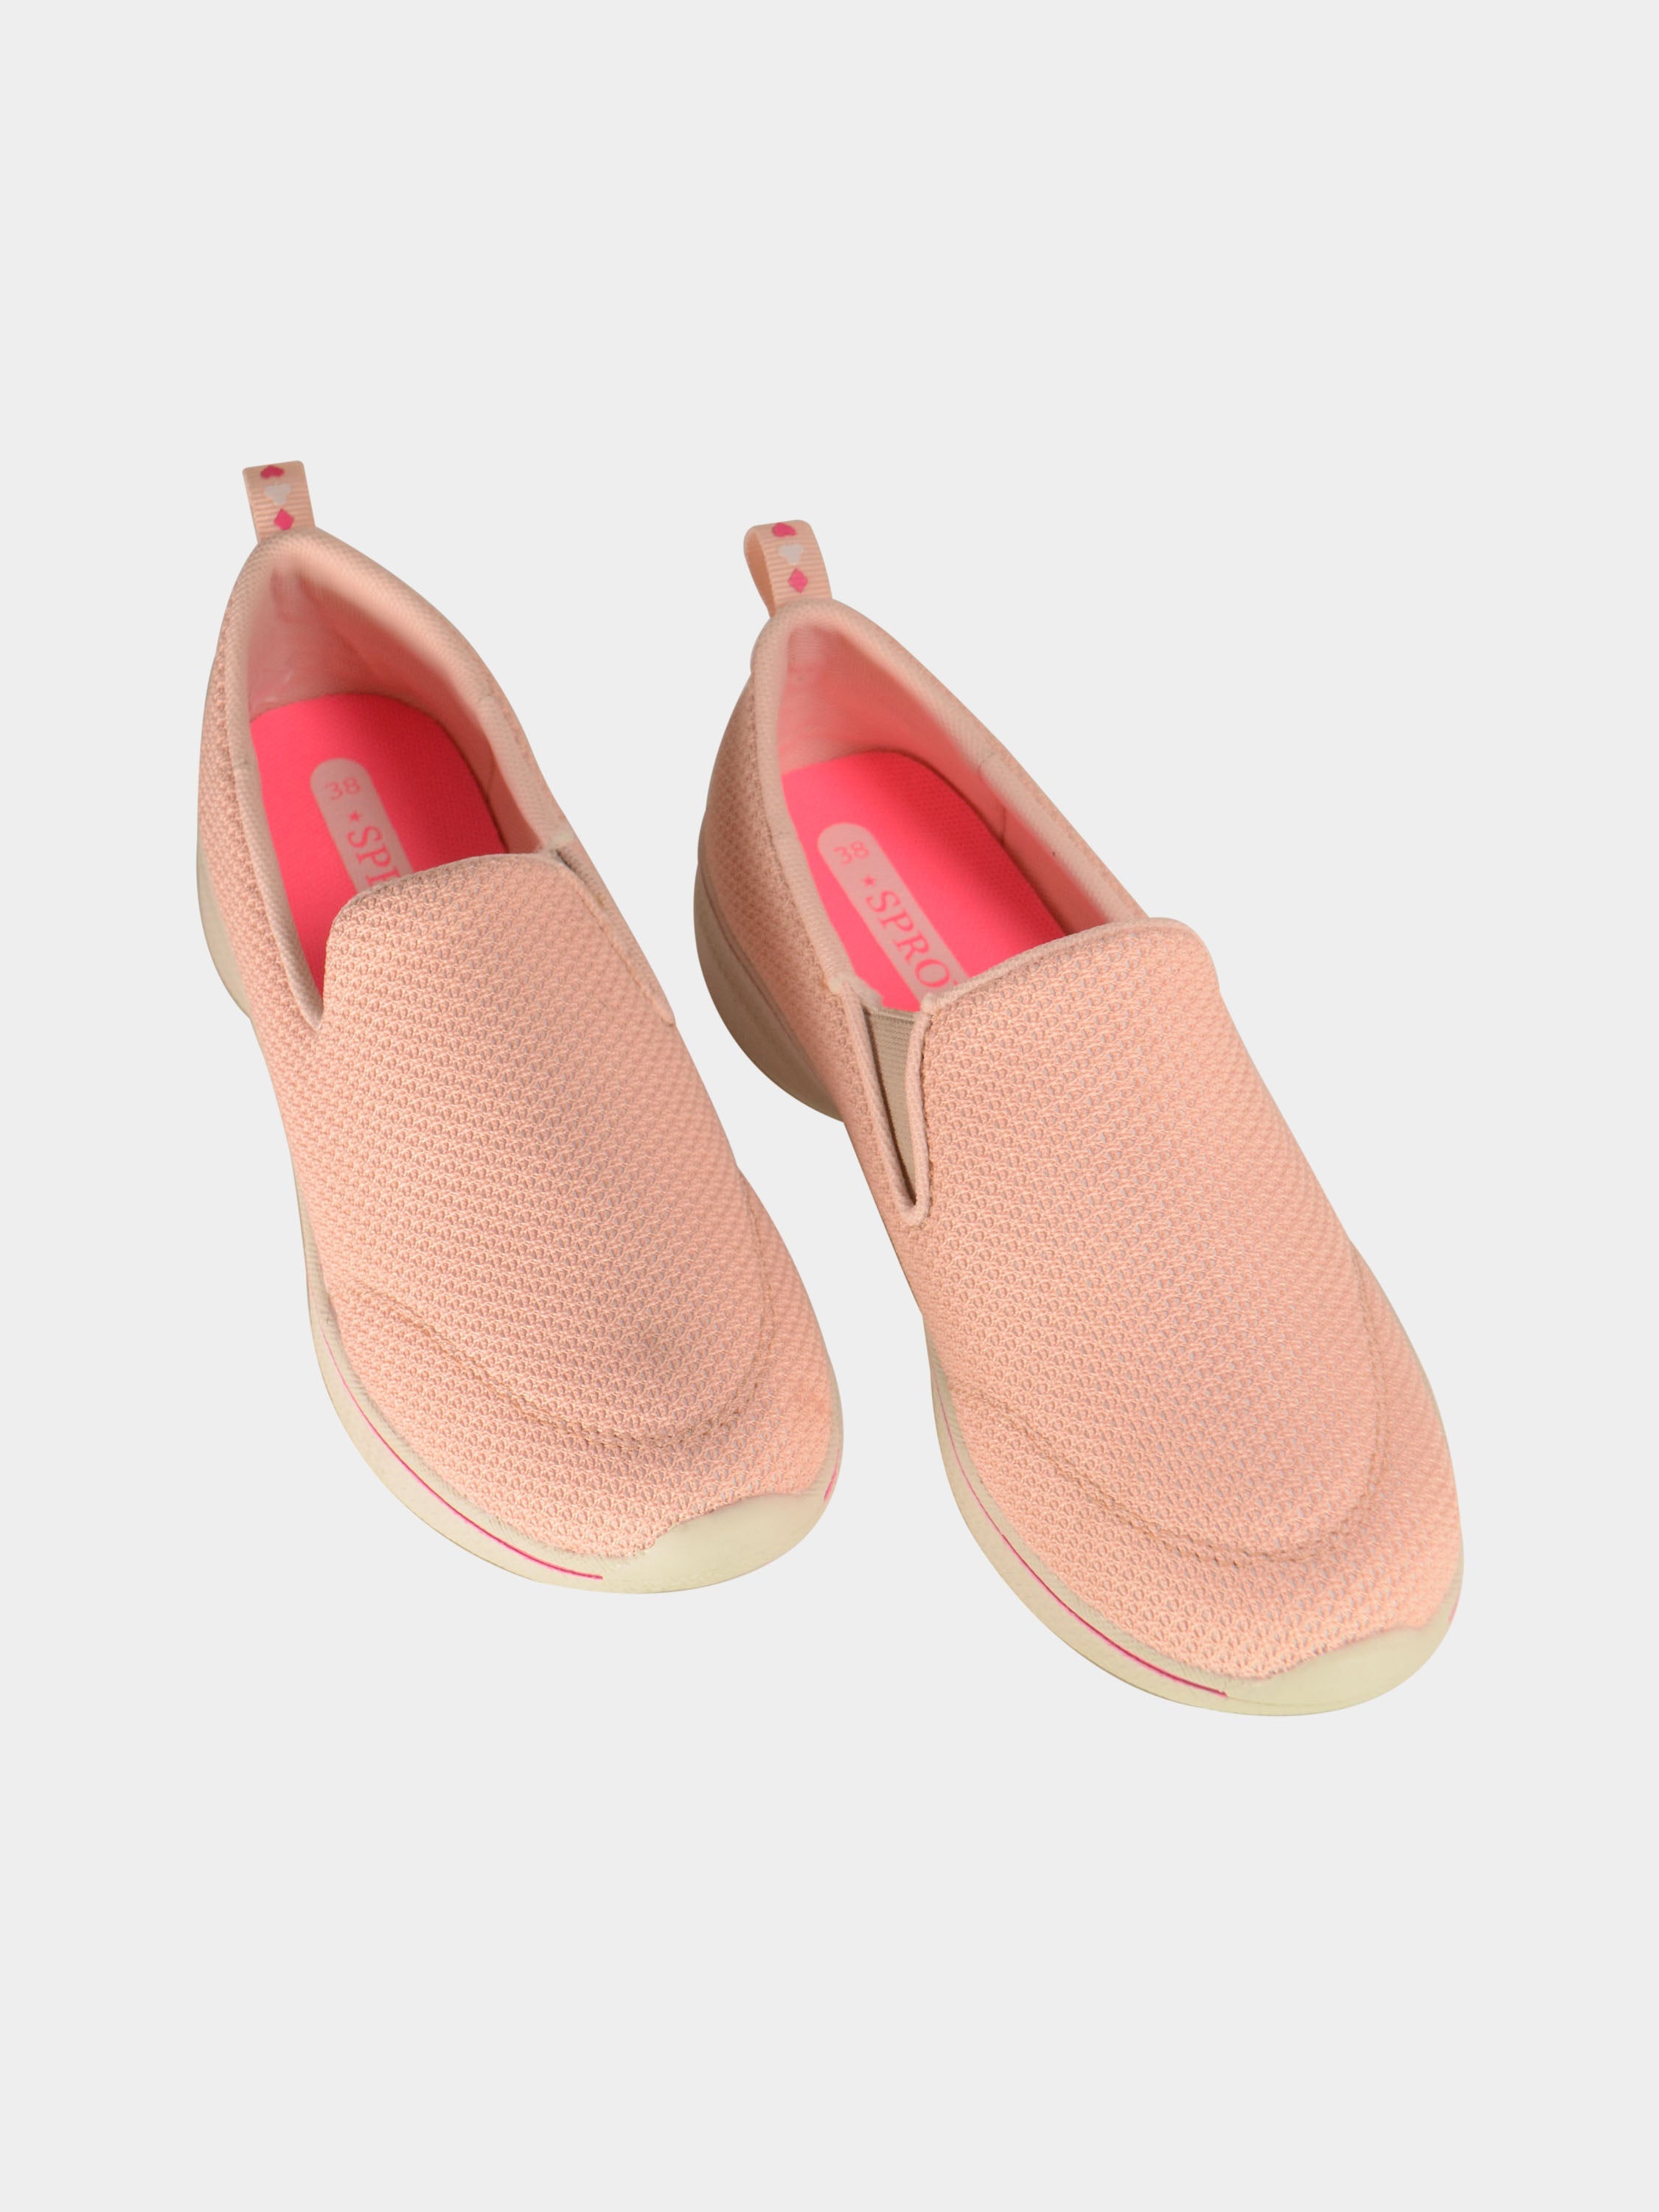 Sprox Women Slip On Shoes #color_Beige